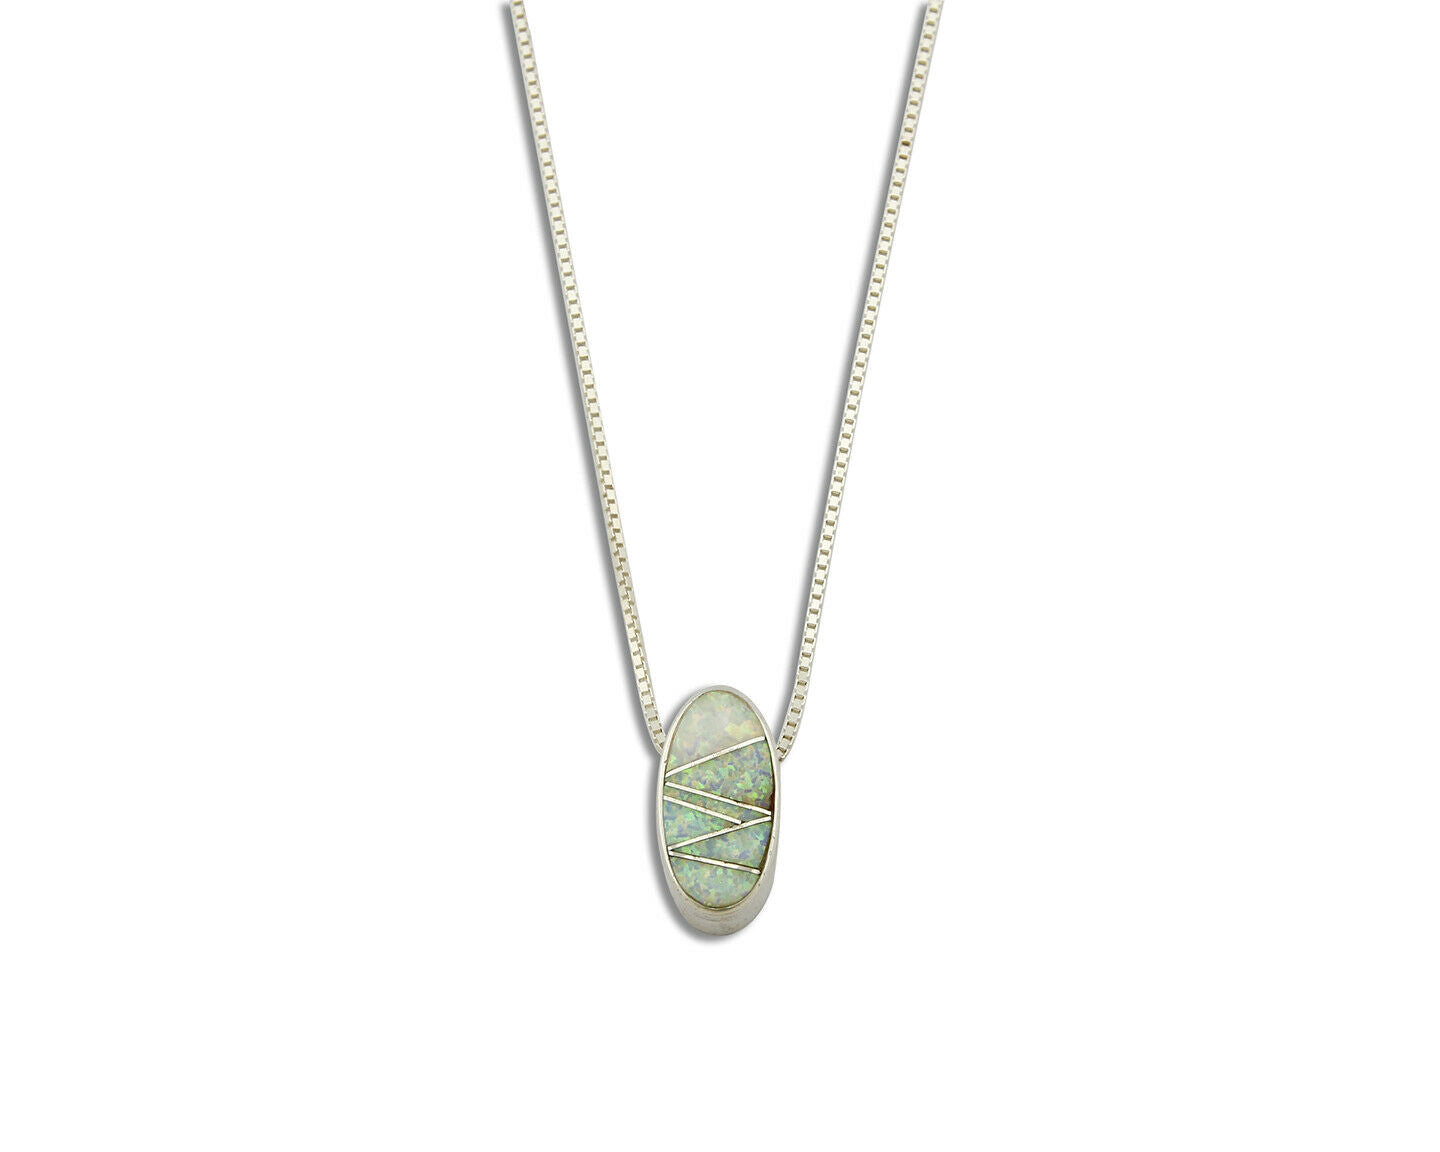 Women's Opal Inlaid Necklace .925 Silver Oval Signed Pendant